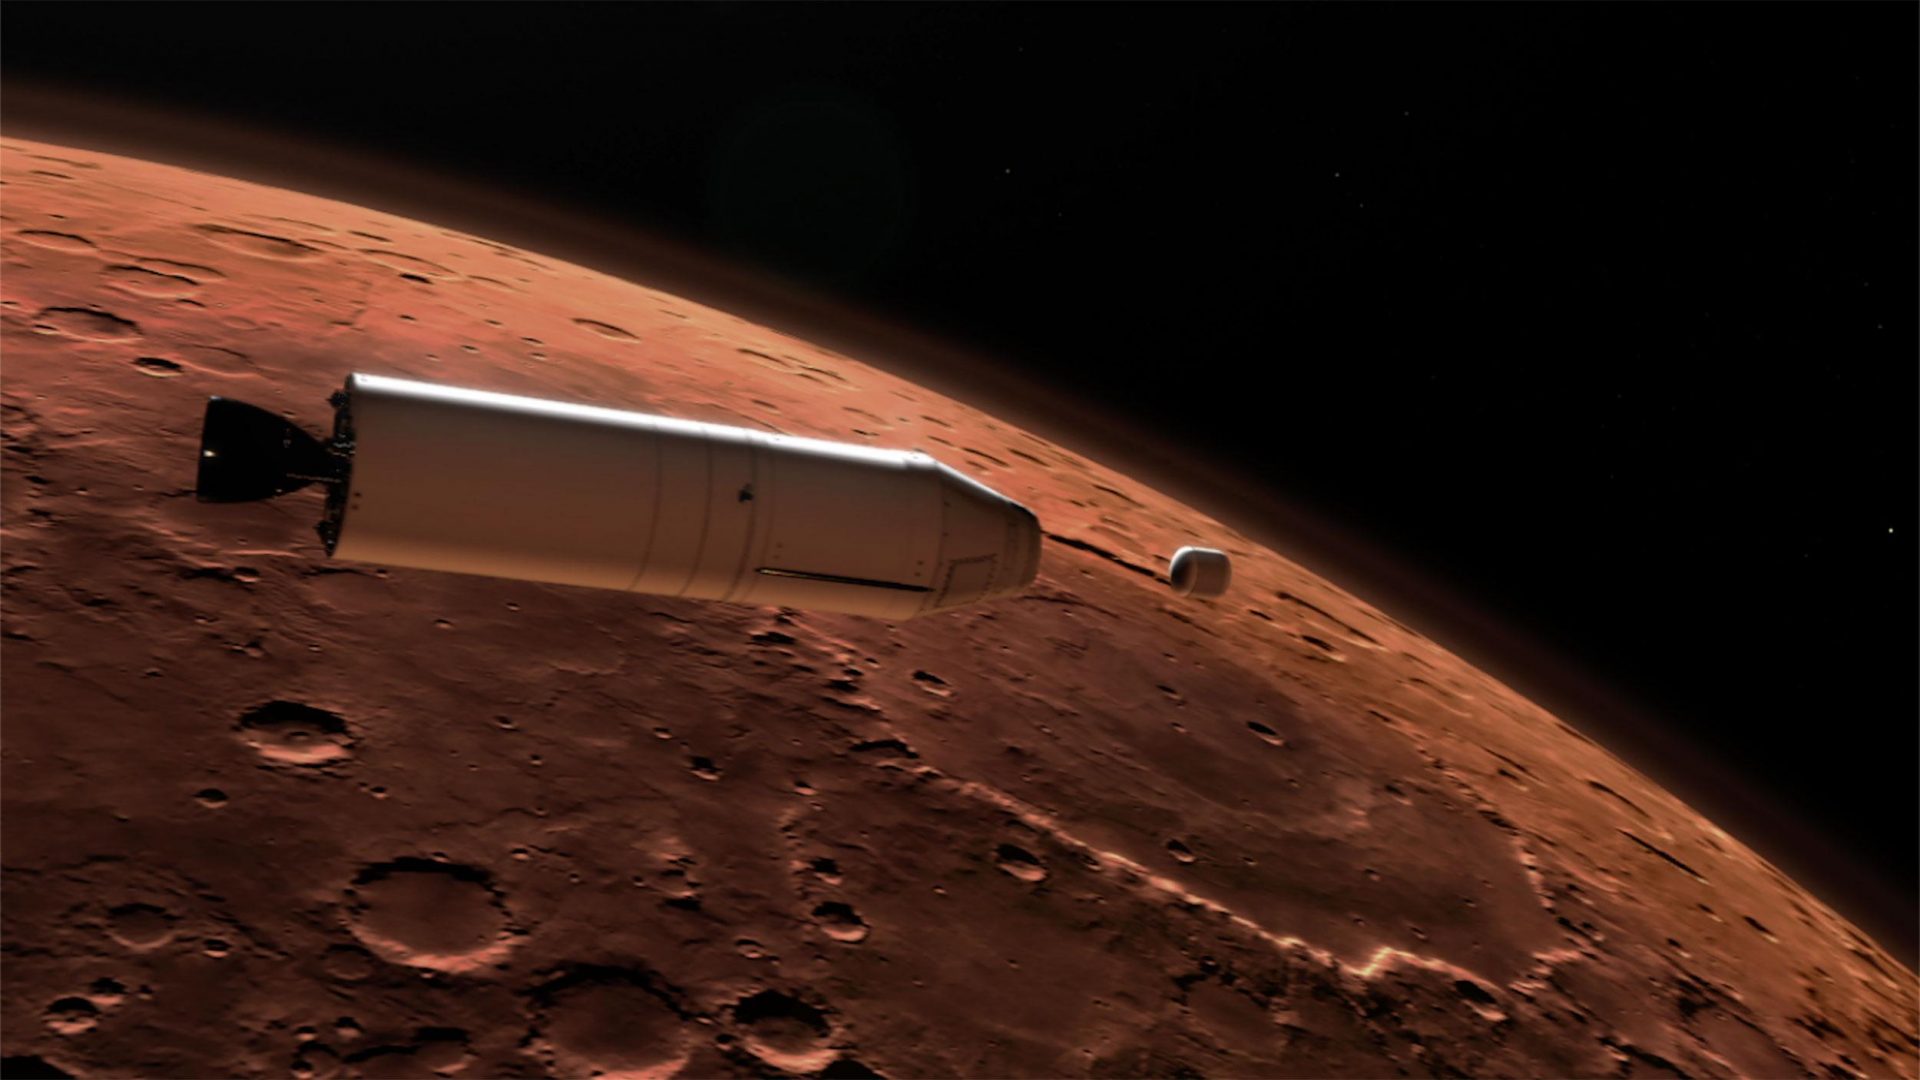 Possibly Reaching Mars in 45 Days with This Nuclear Thermal Rocket